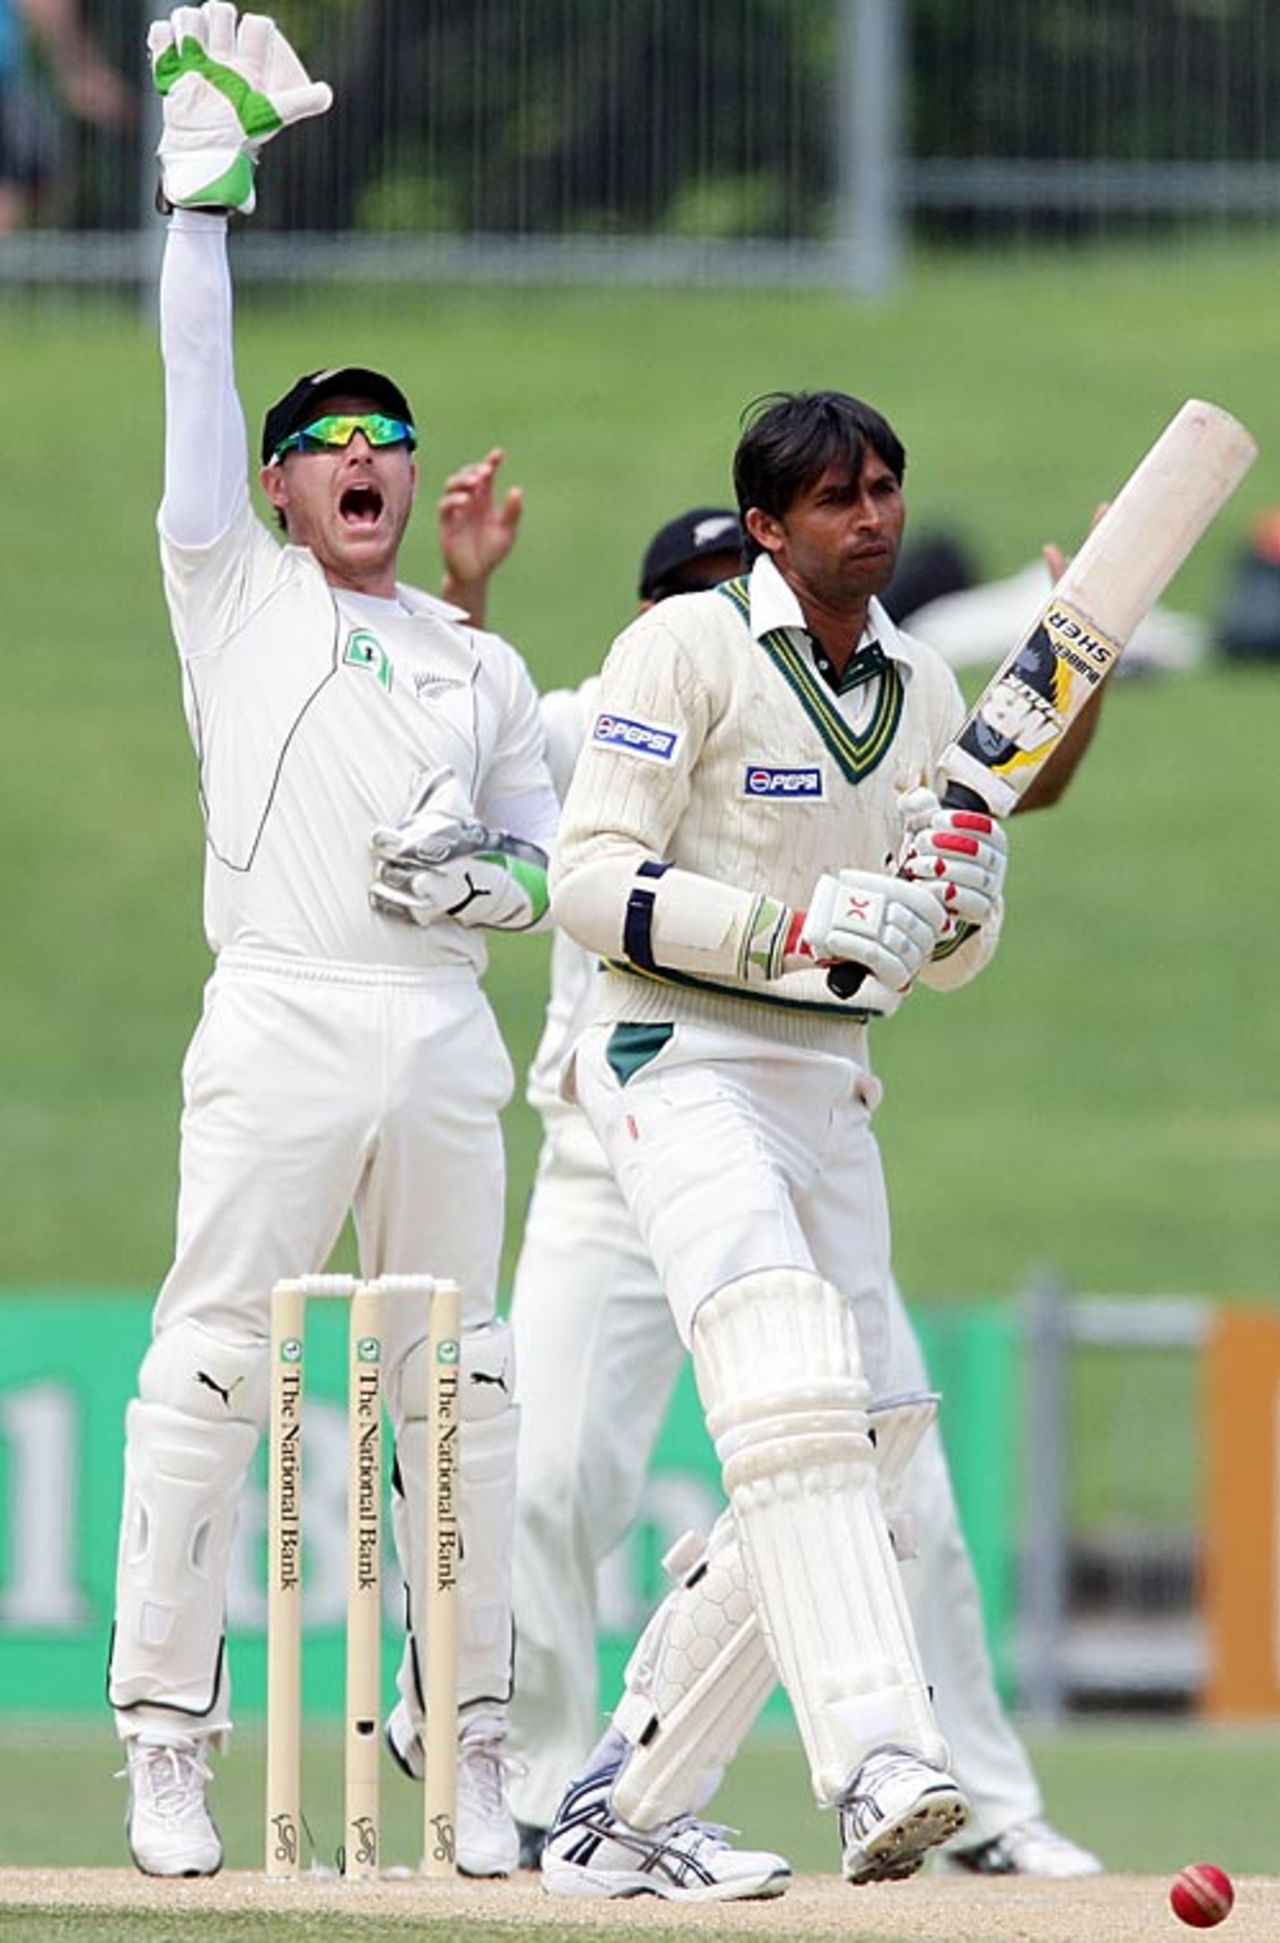 Brendon McCullum appeals against Mohammad Asif, New Zealand v Pakistan, 3rd Test, Napier, 5th day, December 15, 2009